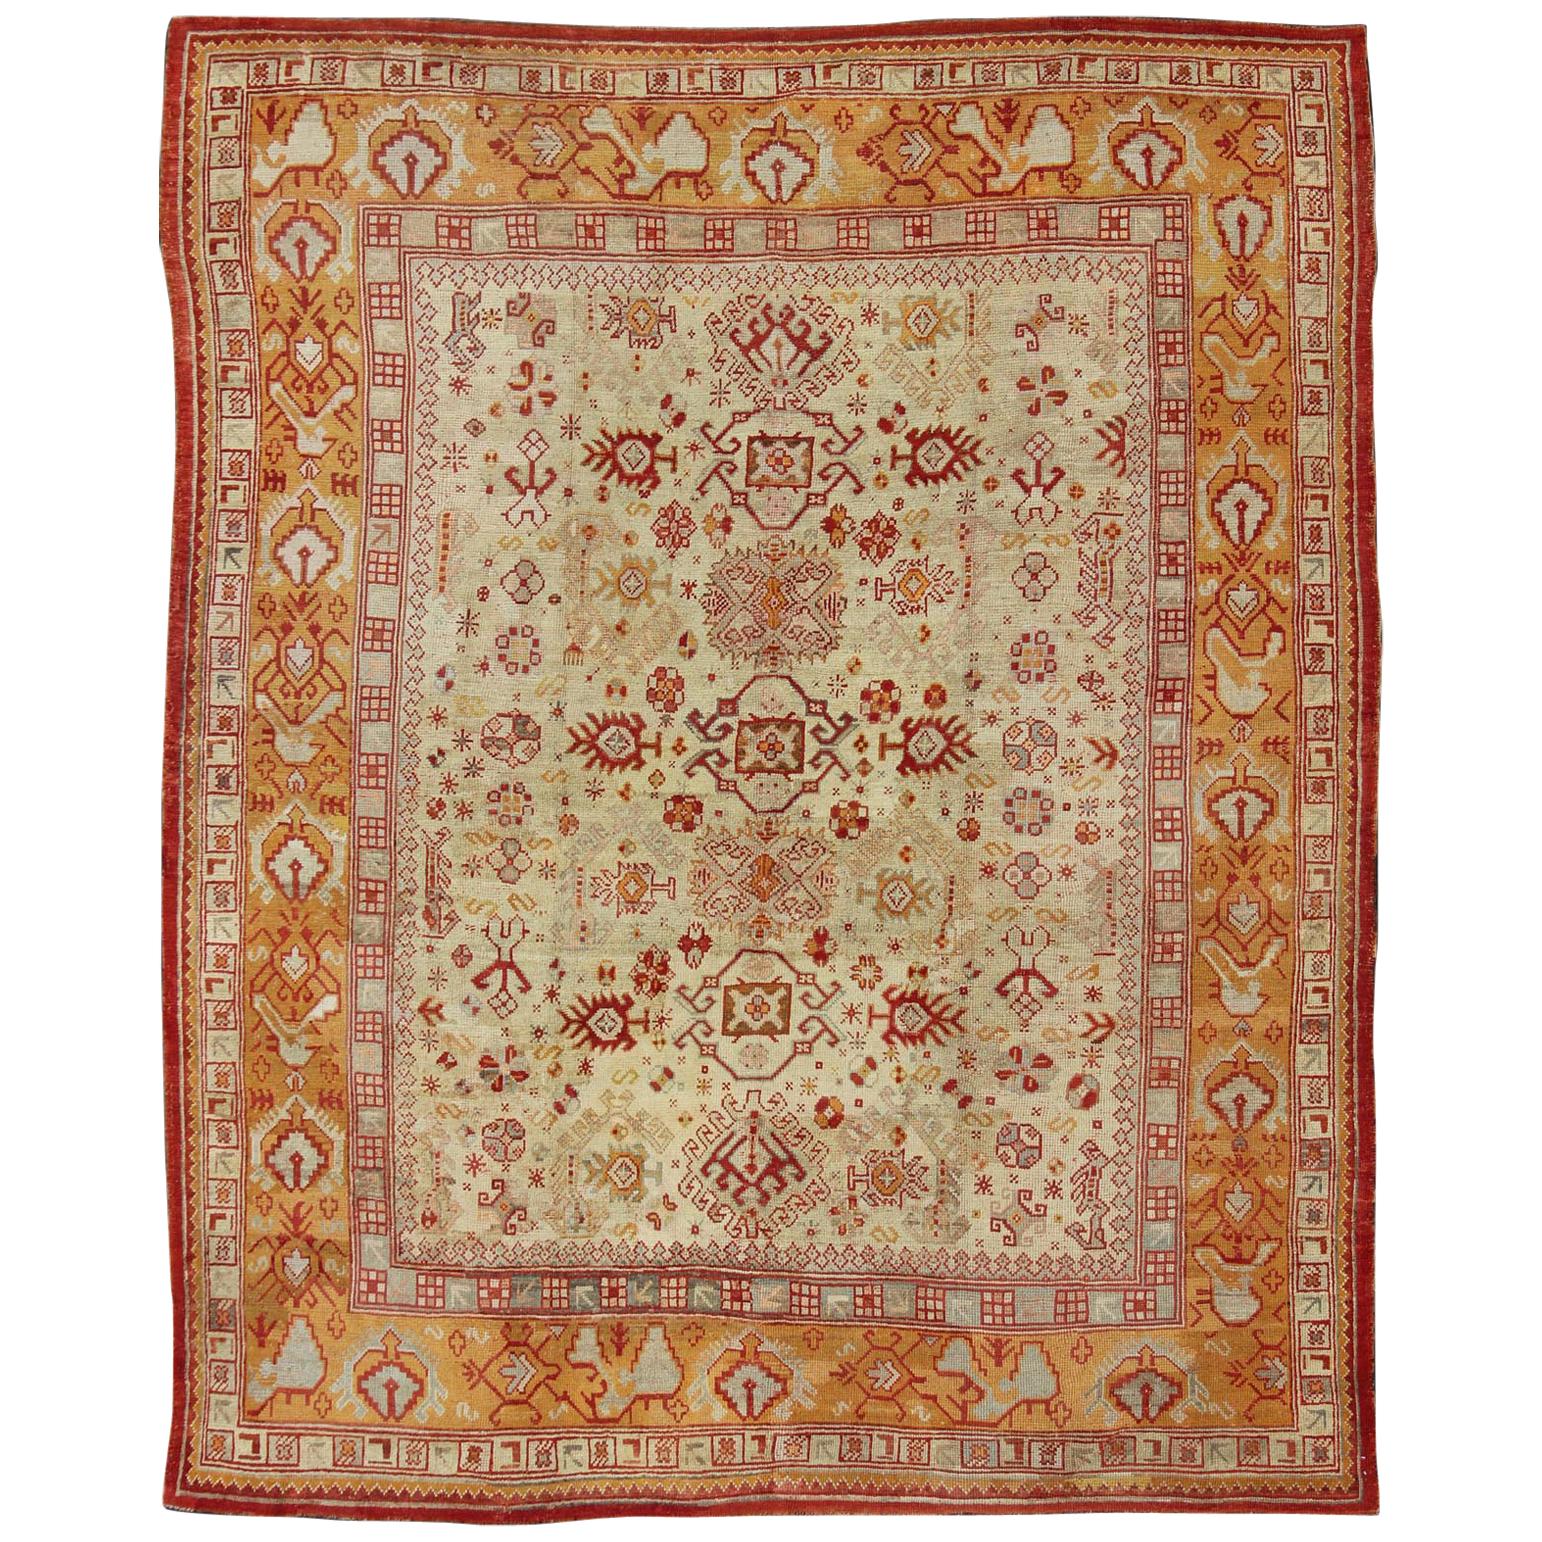 Antique Turkish Oushak Carpet With All-Over Design In Red, Taupe, and Orange For Sale